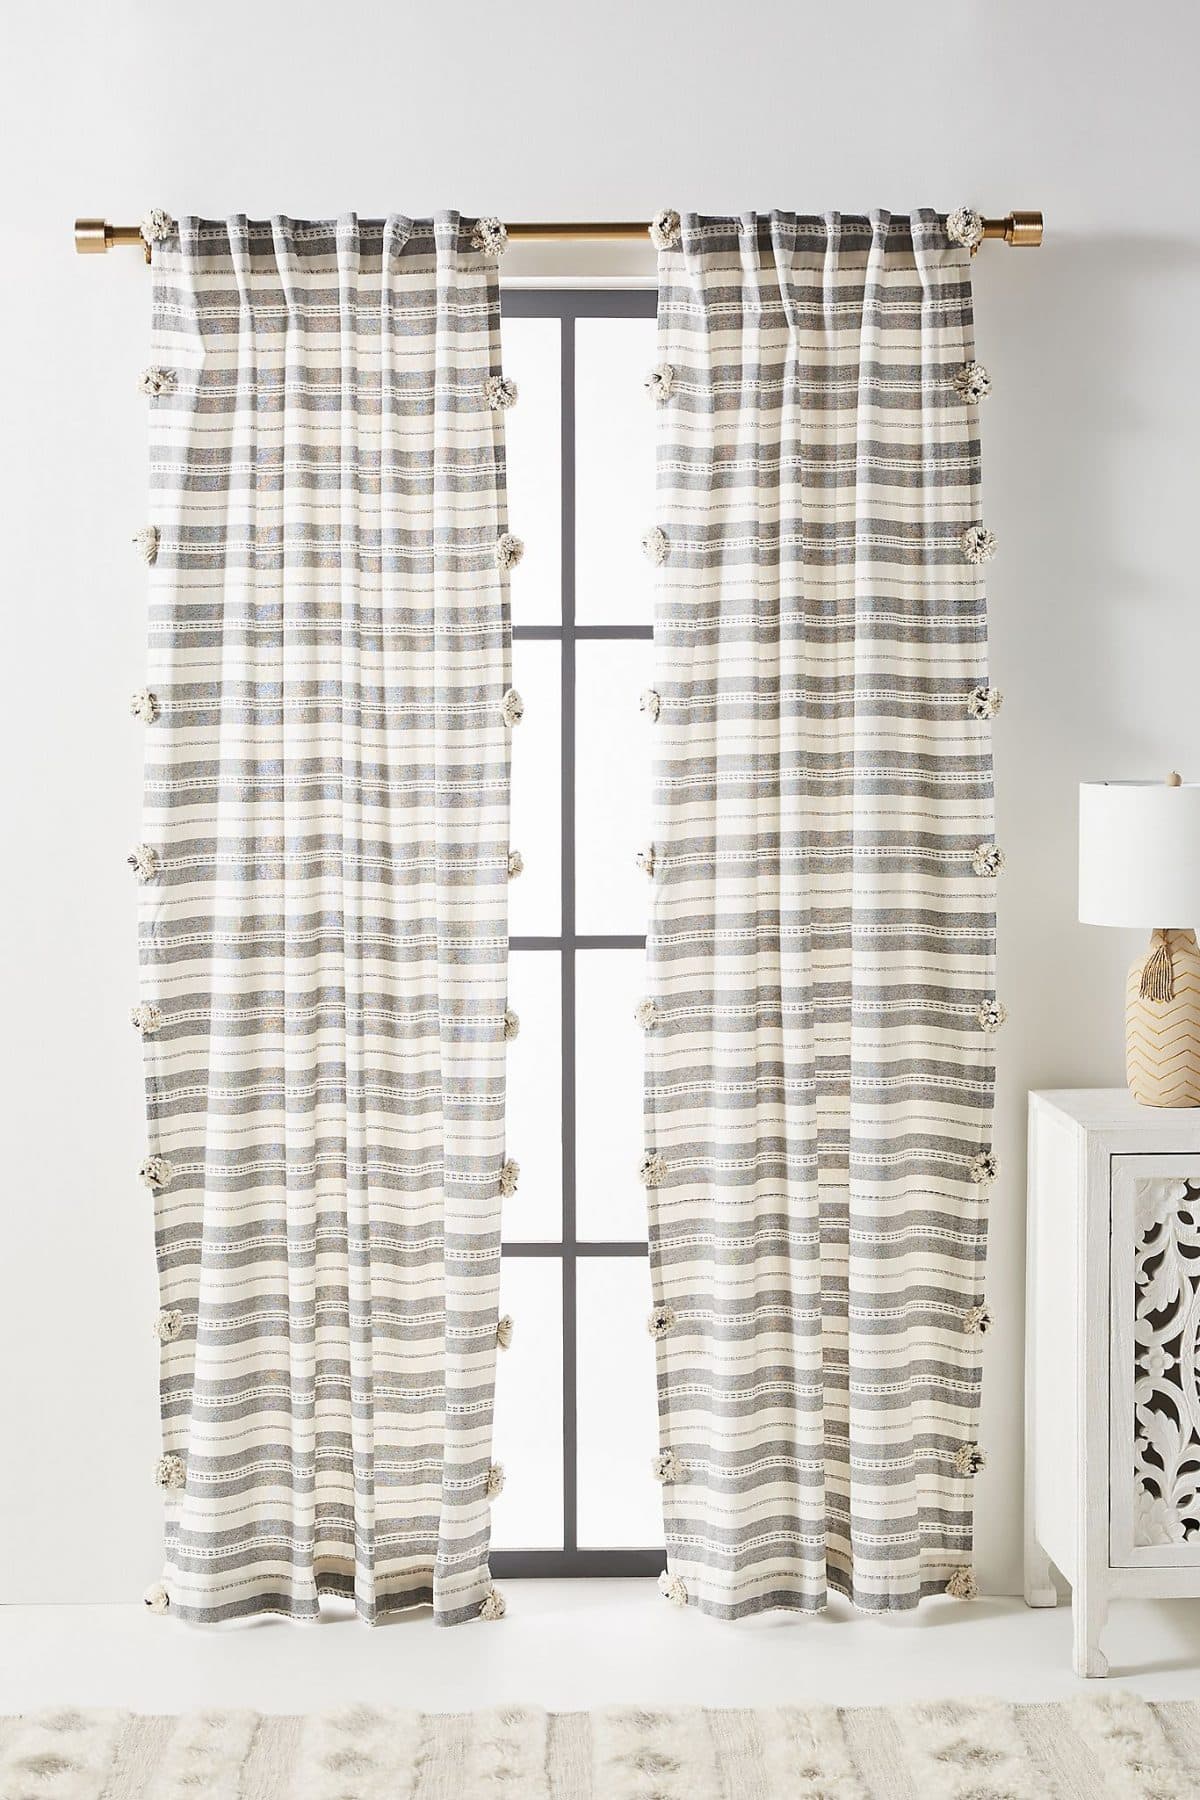 12 Striped Curtains Are Simple And Beautiful 1200x1800 